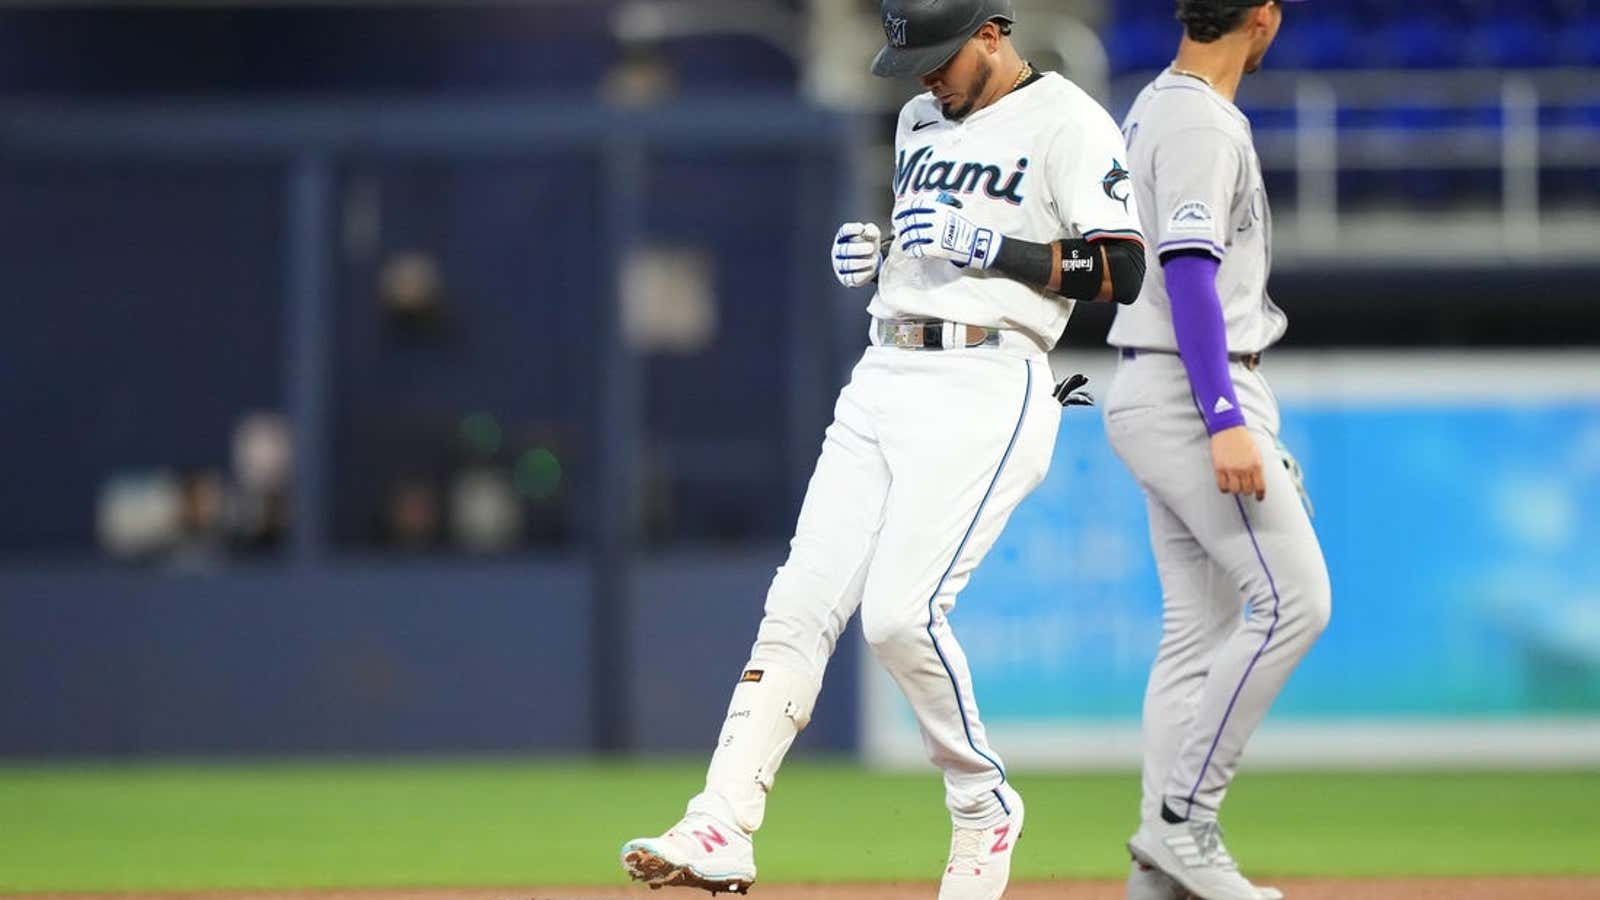 Image for Marlins sweep Rockies on Jesus Sanchez's walk-off hit in 10th